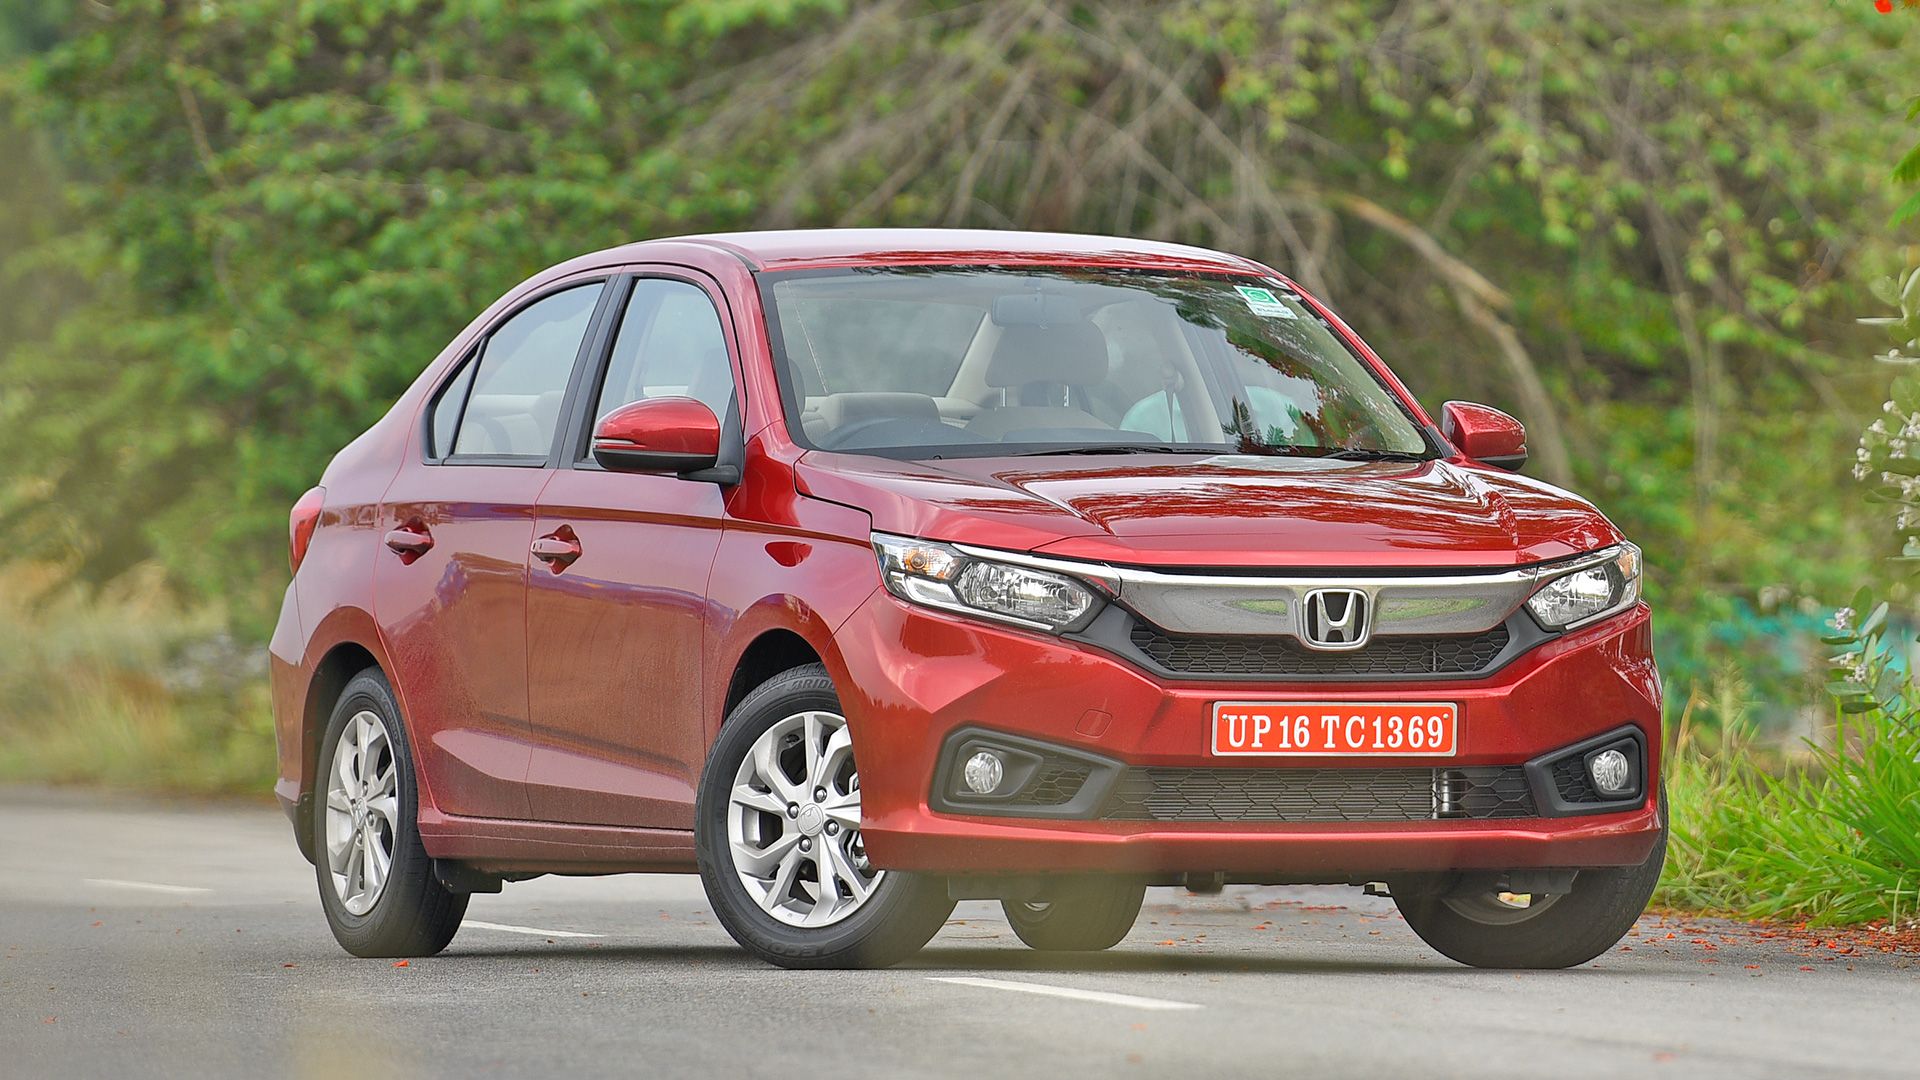 Honda Amaze 2021 - Price in India, Mileage, Reviews, Colours,  Specification, Images - Overdrive